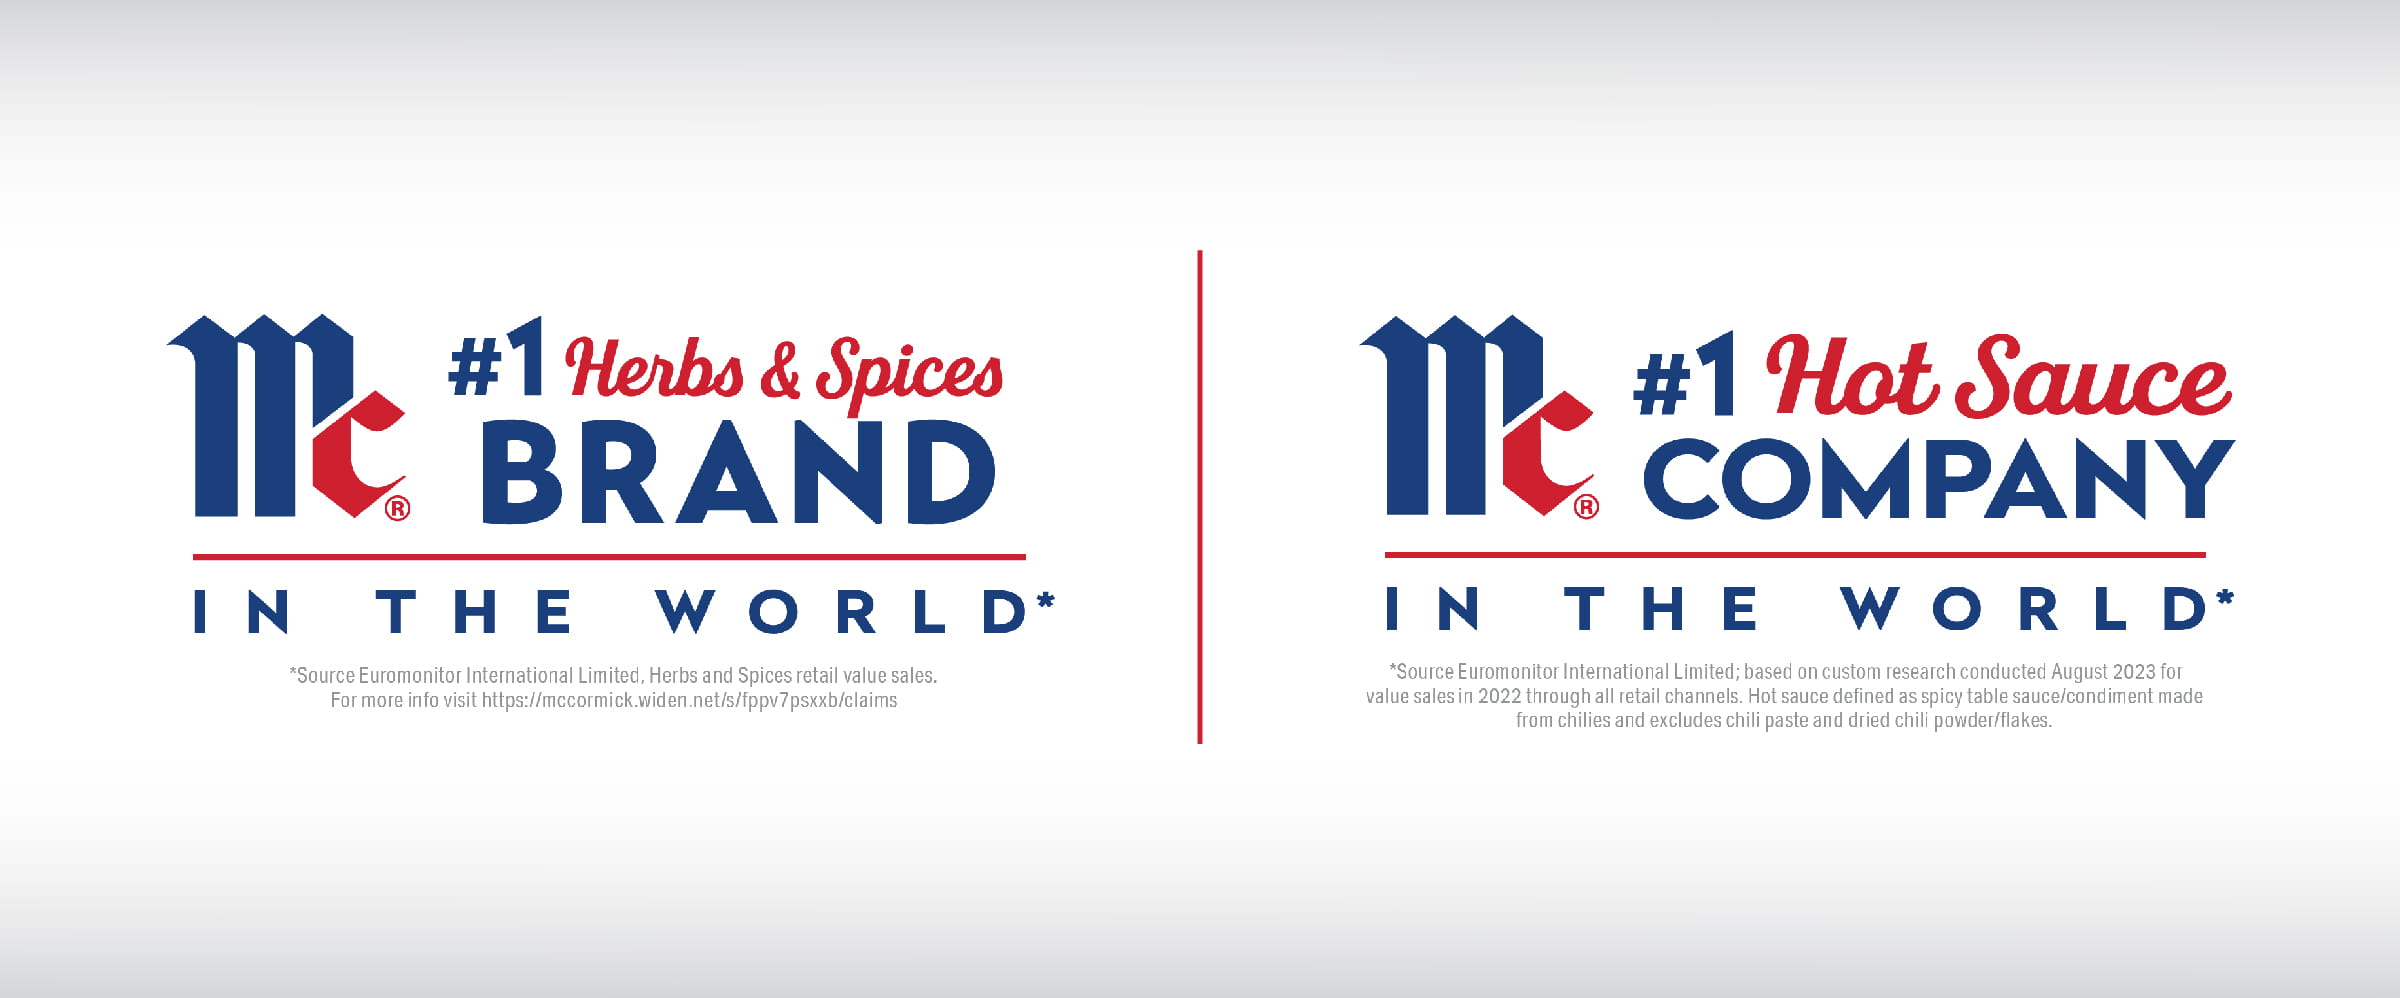 McCormick is the #1 herbs and spices brand in the world / McCormick is the #1 hot sauce company in the world